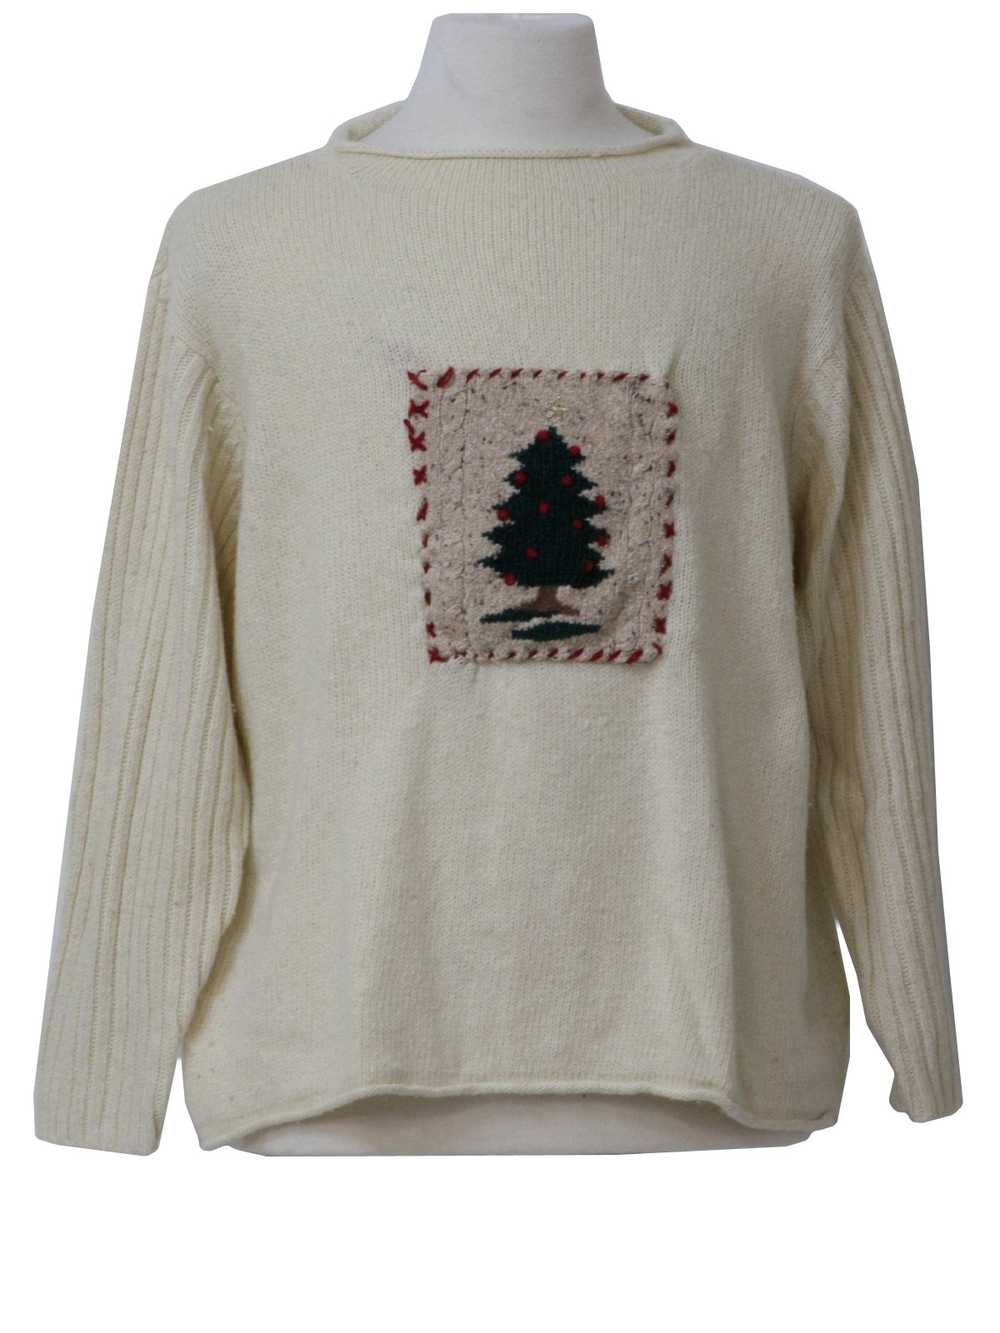 Crazy Horse Womens Ugly Christmas Sweater - image 1